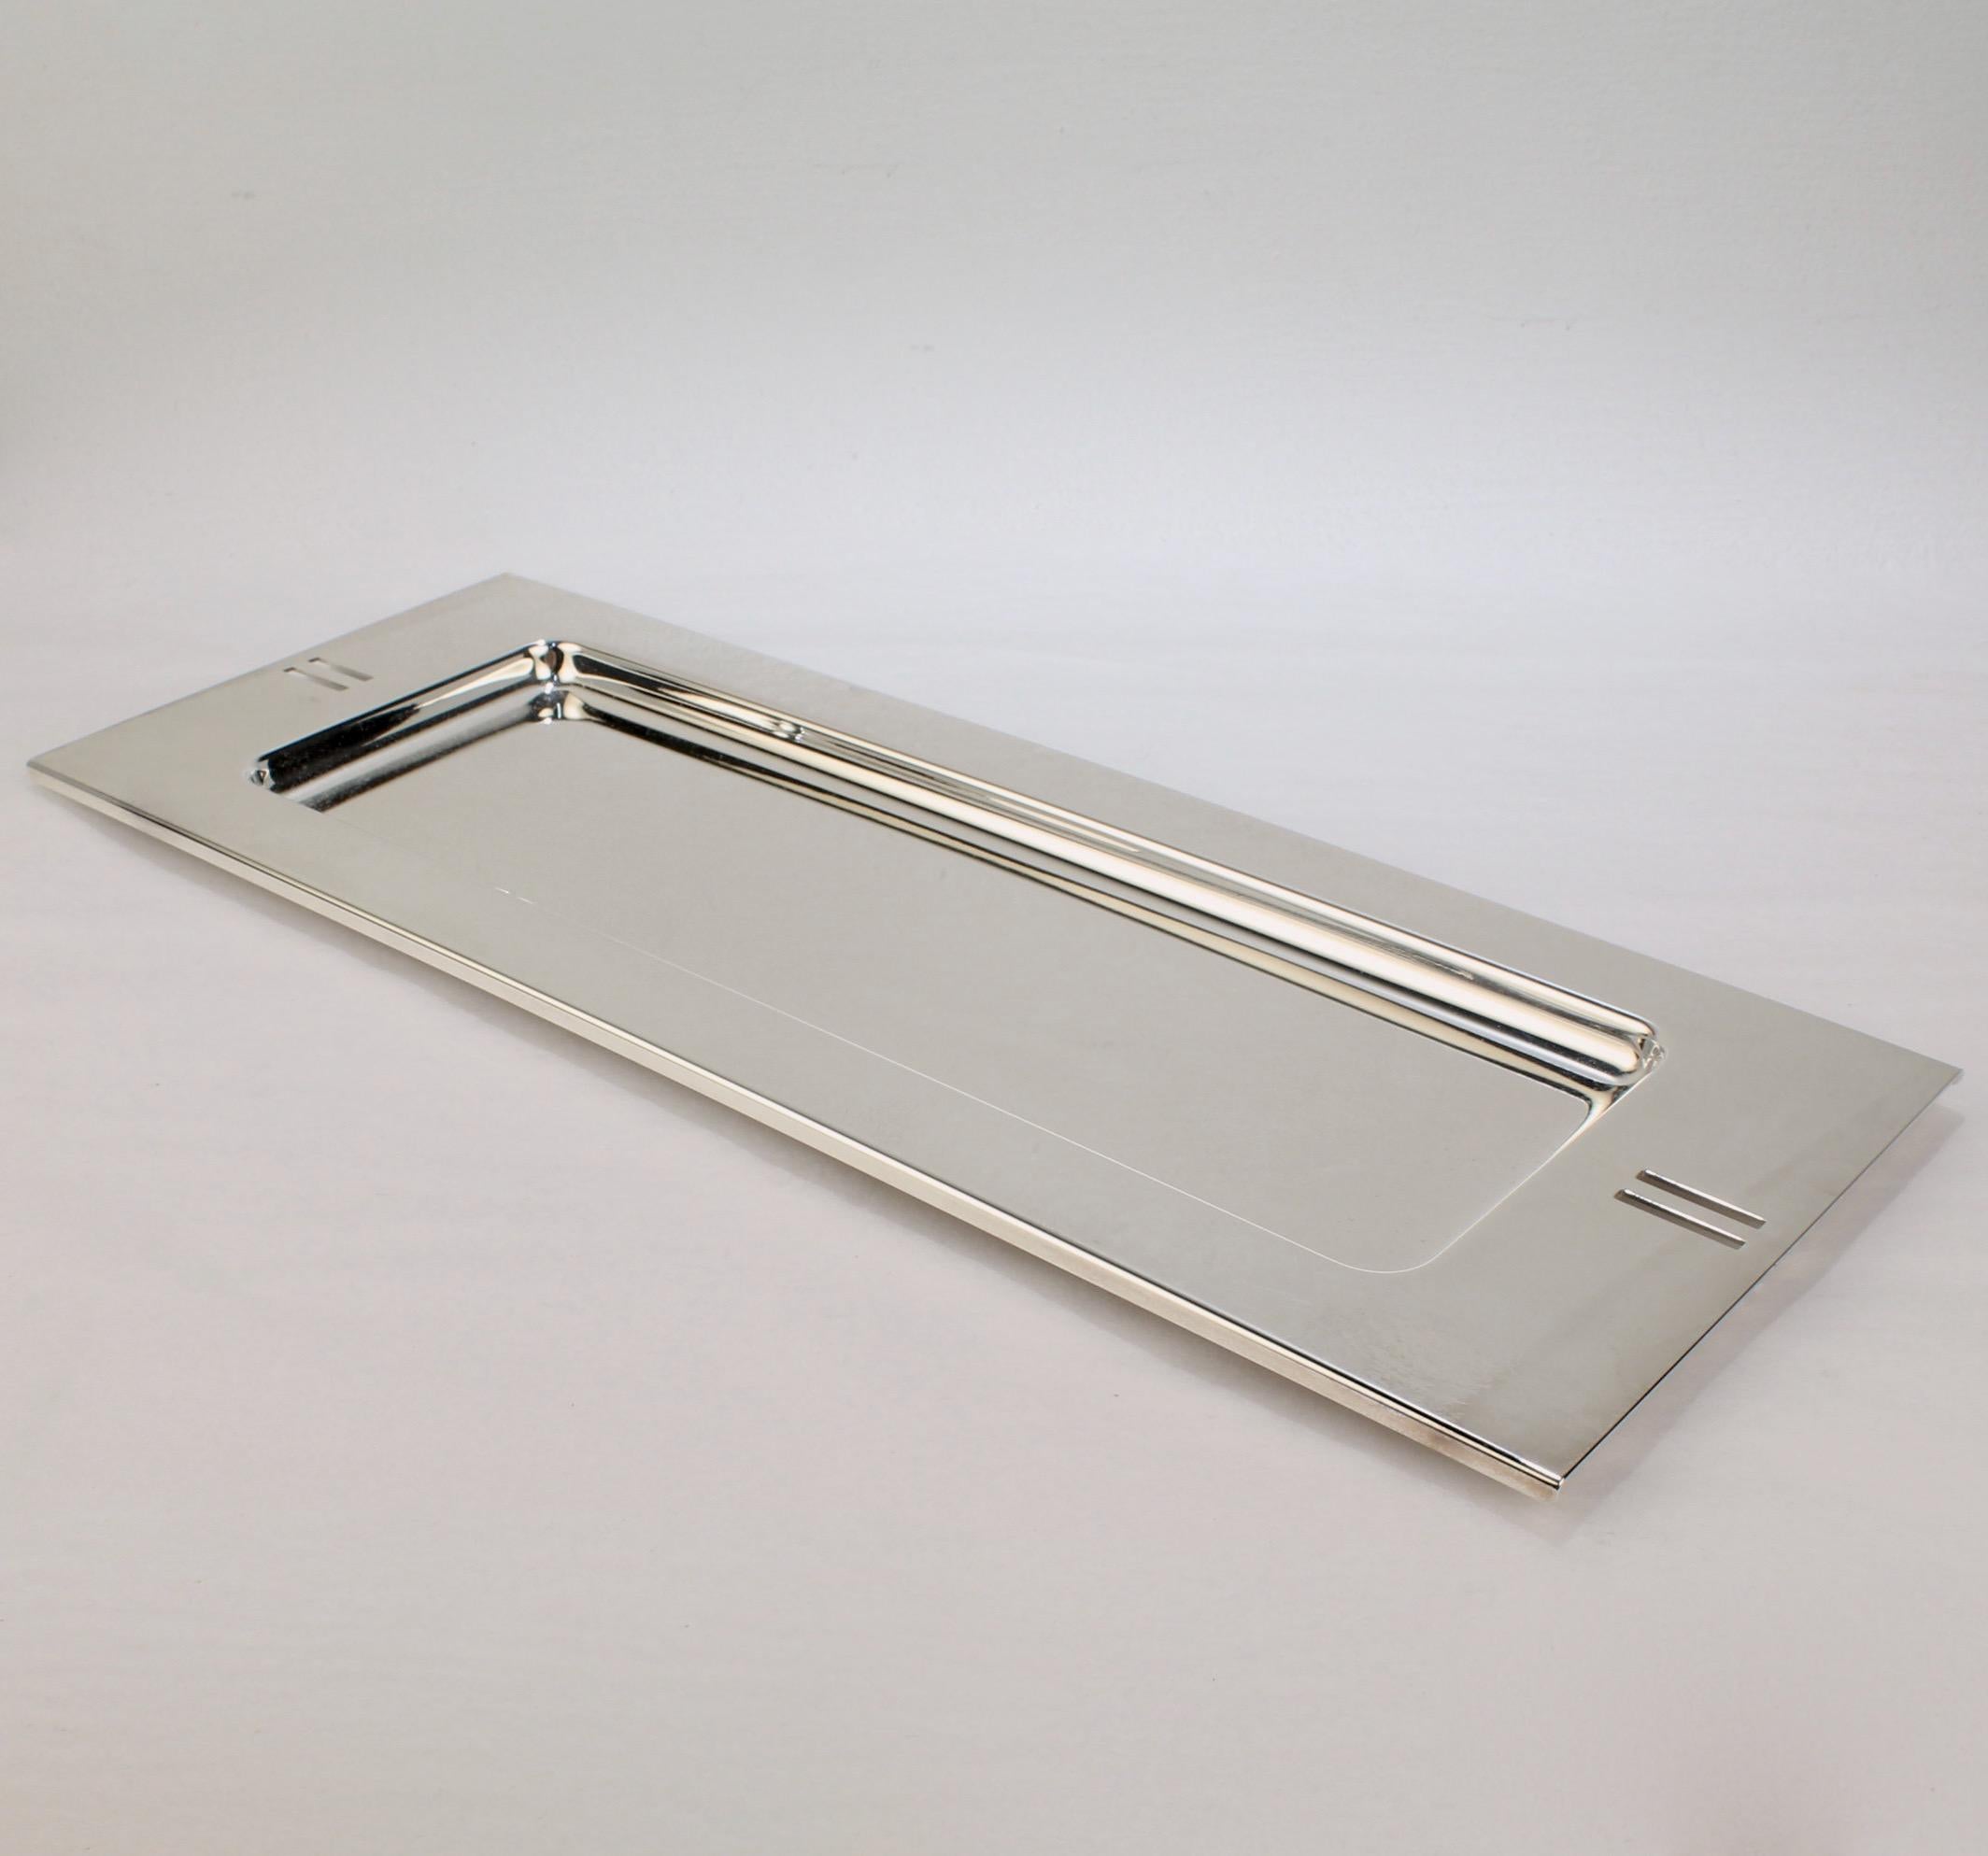 A postmodern silver-plated rectangular tray.

Designed by Richard Meier for Swid Powell.

Model no. 3416.

Together with its original box.

Swid Powell was the highly acclaimed New York City based tableware company founded by Nan Swid and Addie